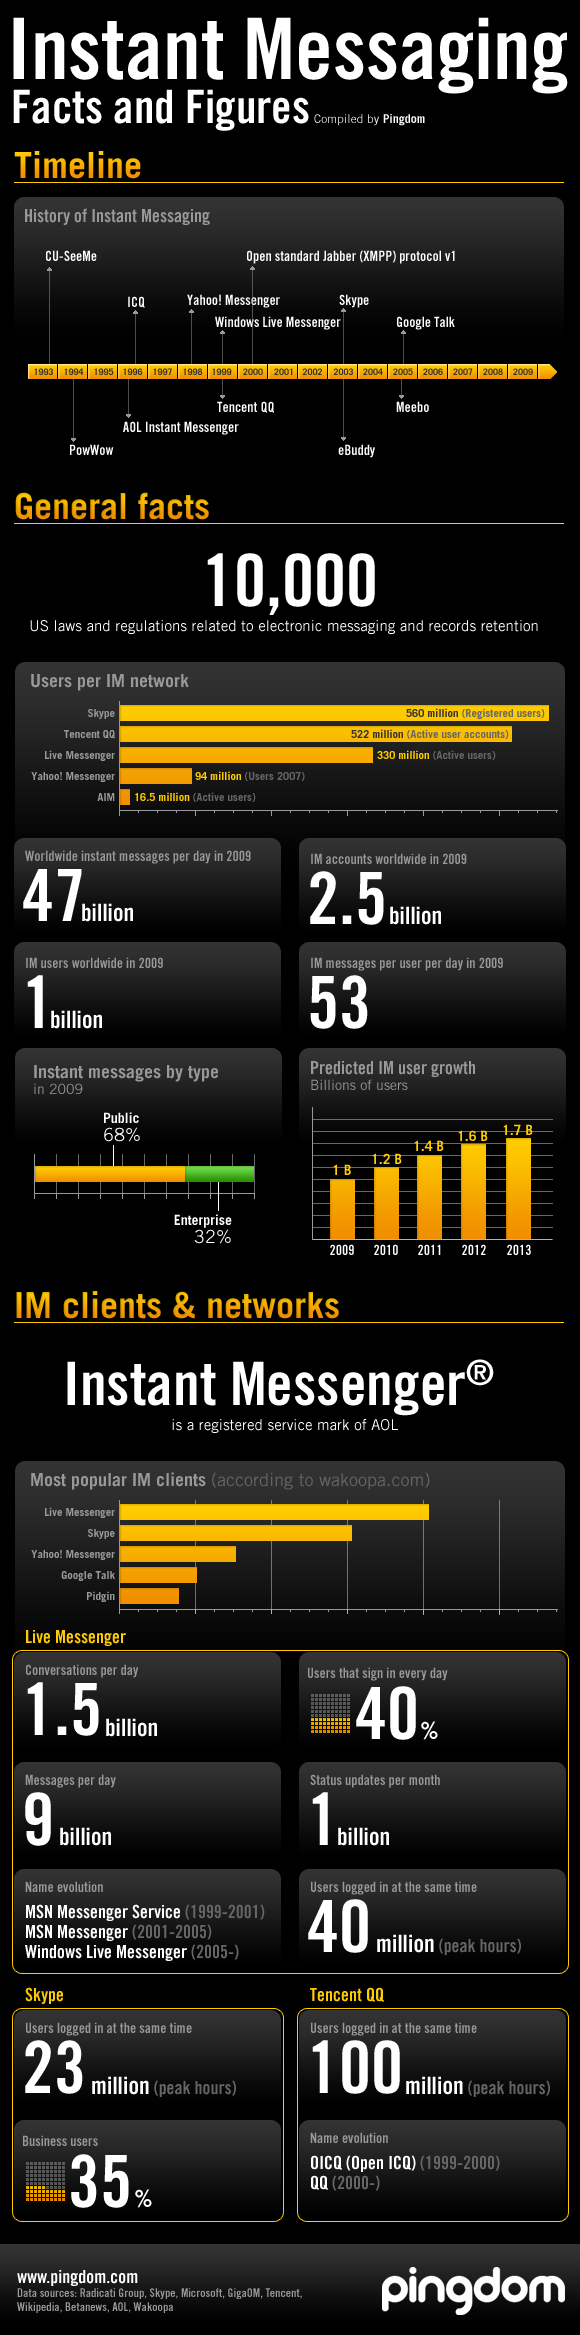 Instant Messaging infographic